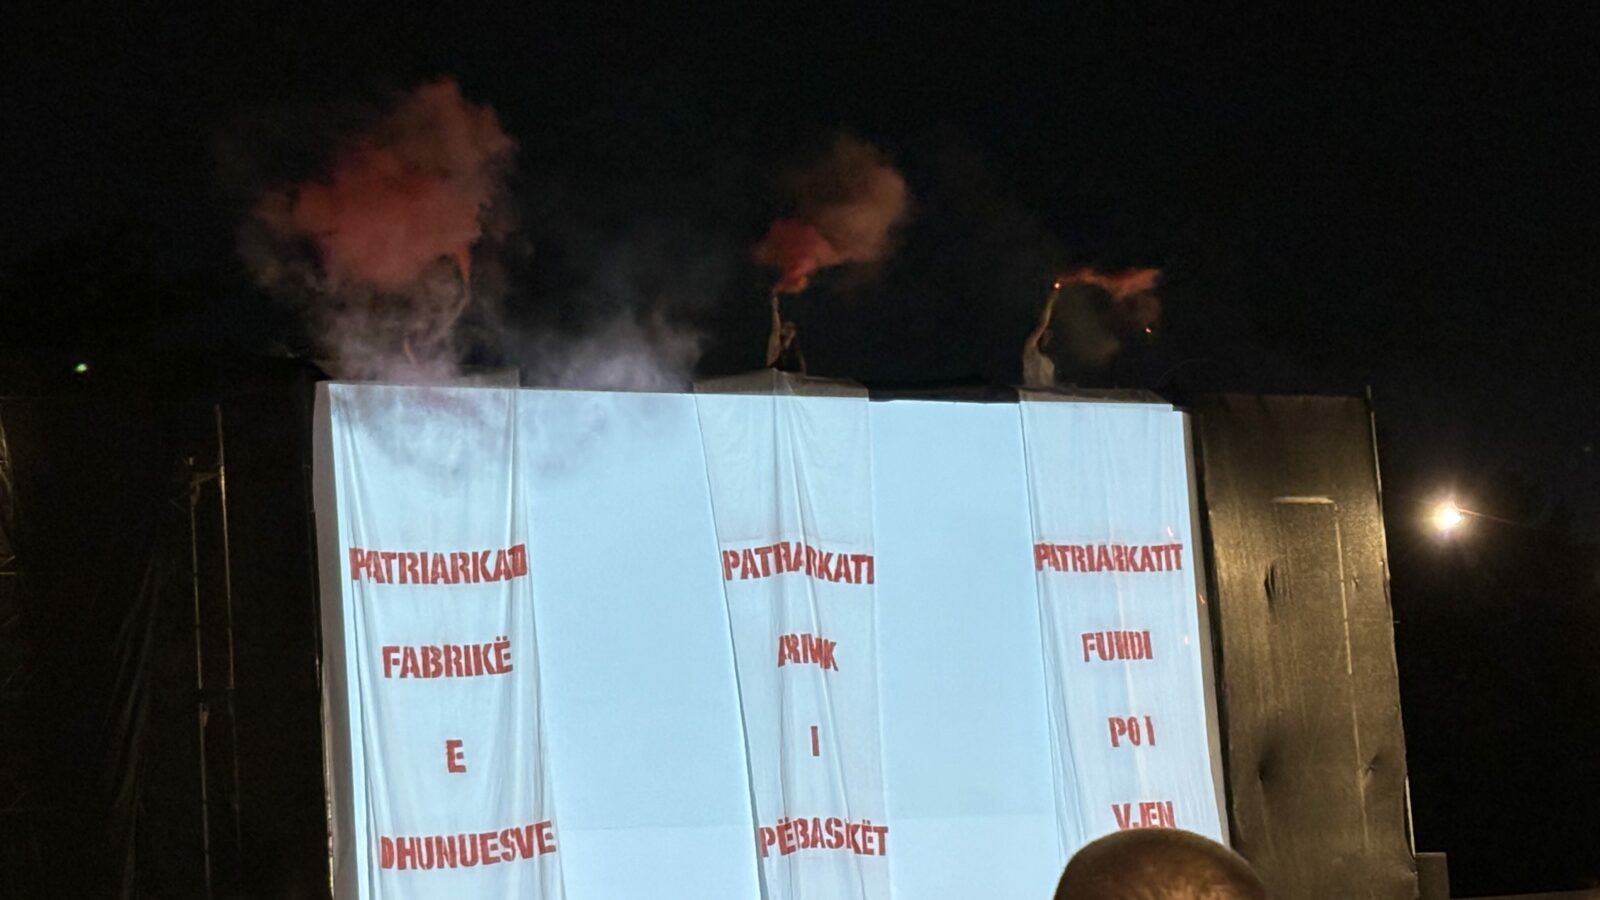 Posters at the opening of Anibar International Animation Festival read: “‘Patriarkati: Fabrikë e Dhunuesve (The Patriarchy: a Factory of Abusers)’; ‘Patriarkati: Armik i Përbashkët (The Patriarchy: Mutual Enemy)’; ‘Patriarkati: Fundi po i vjen (Patriarchy: Its end is coming)’." July 15, 2024. Photo: BIRN